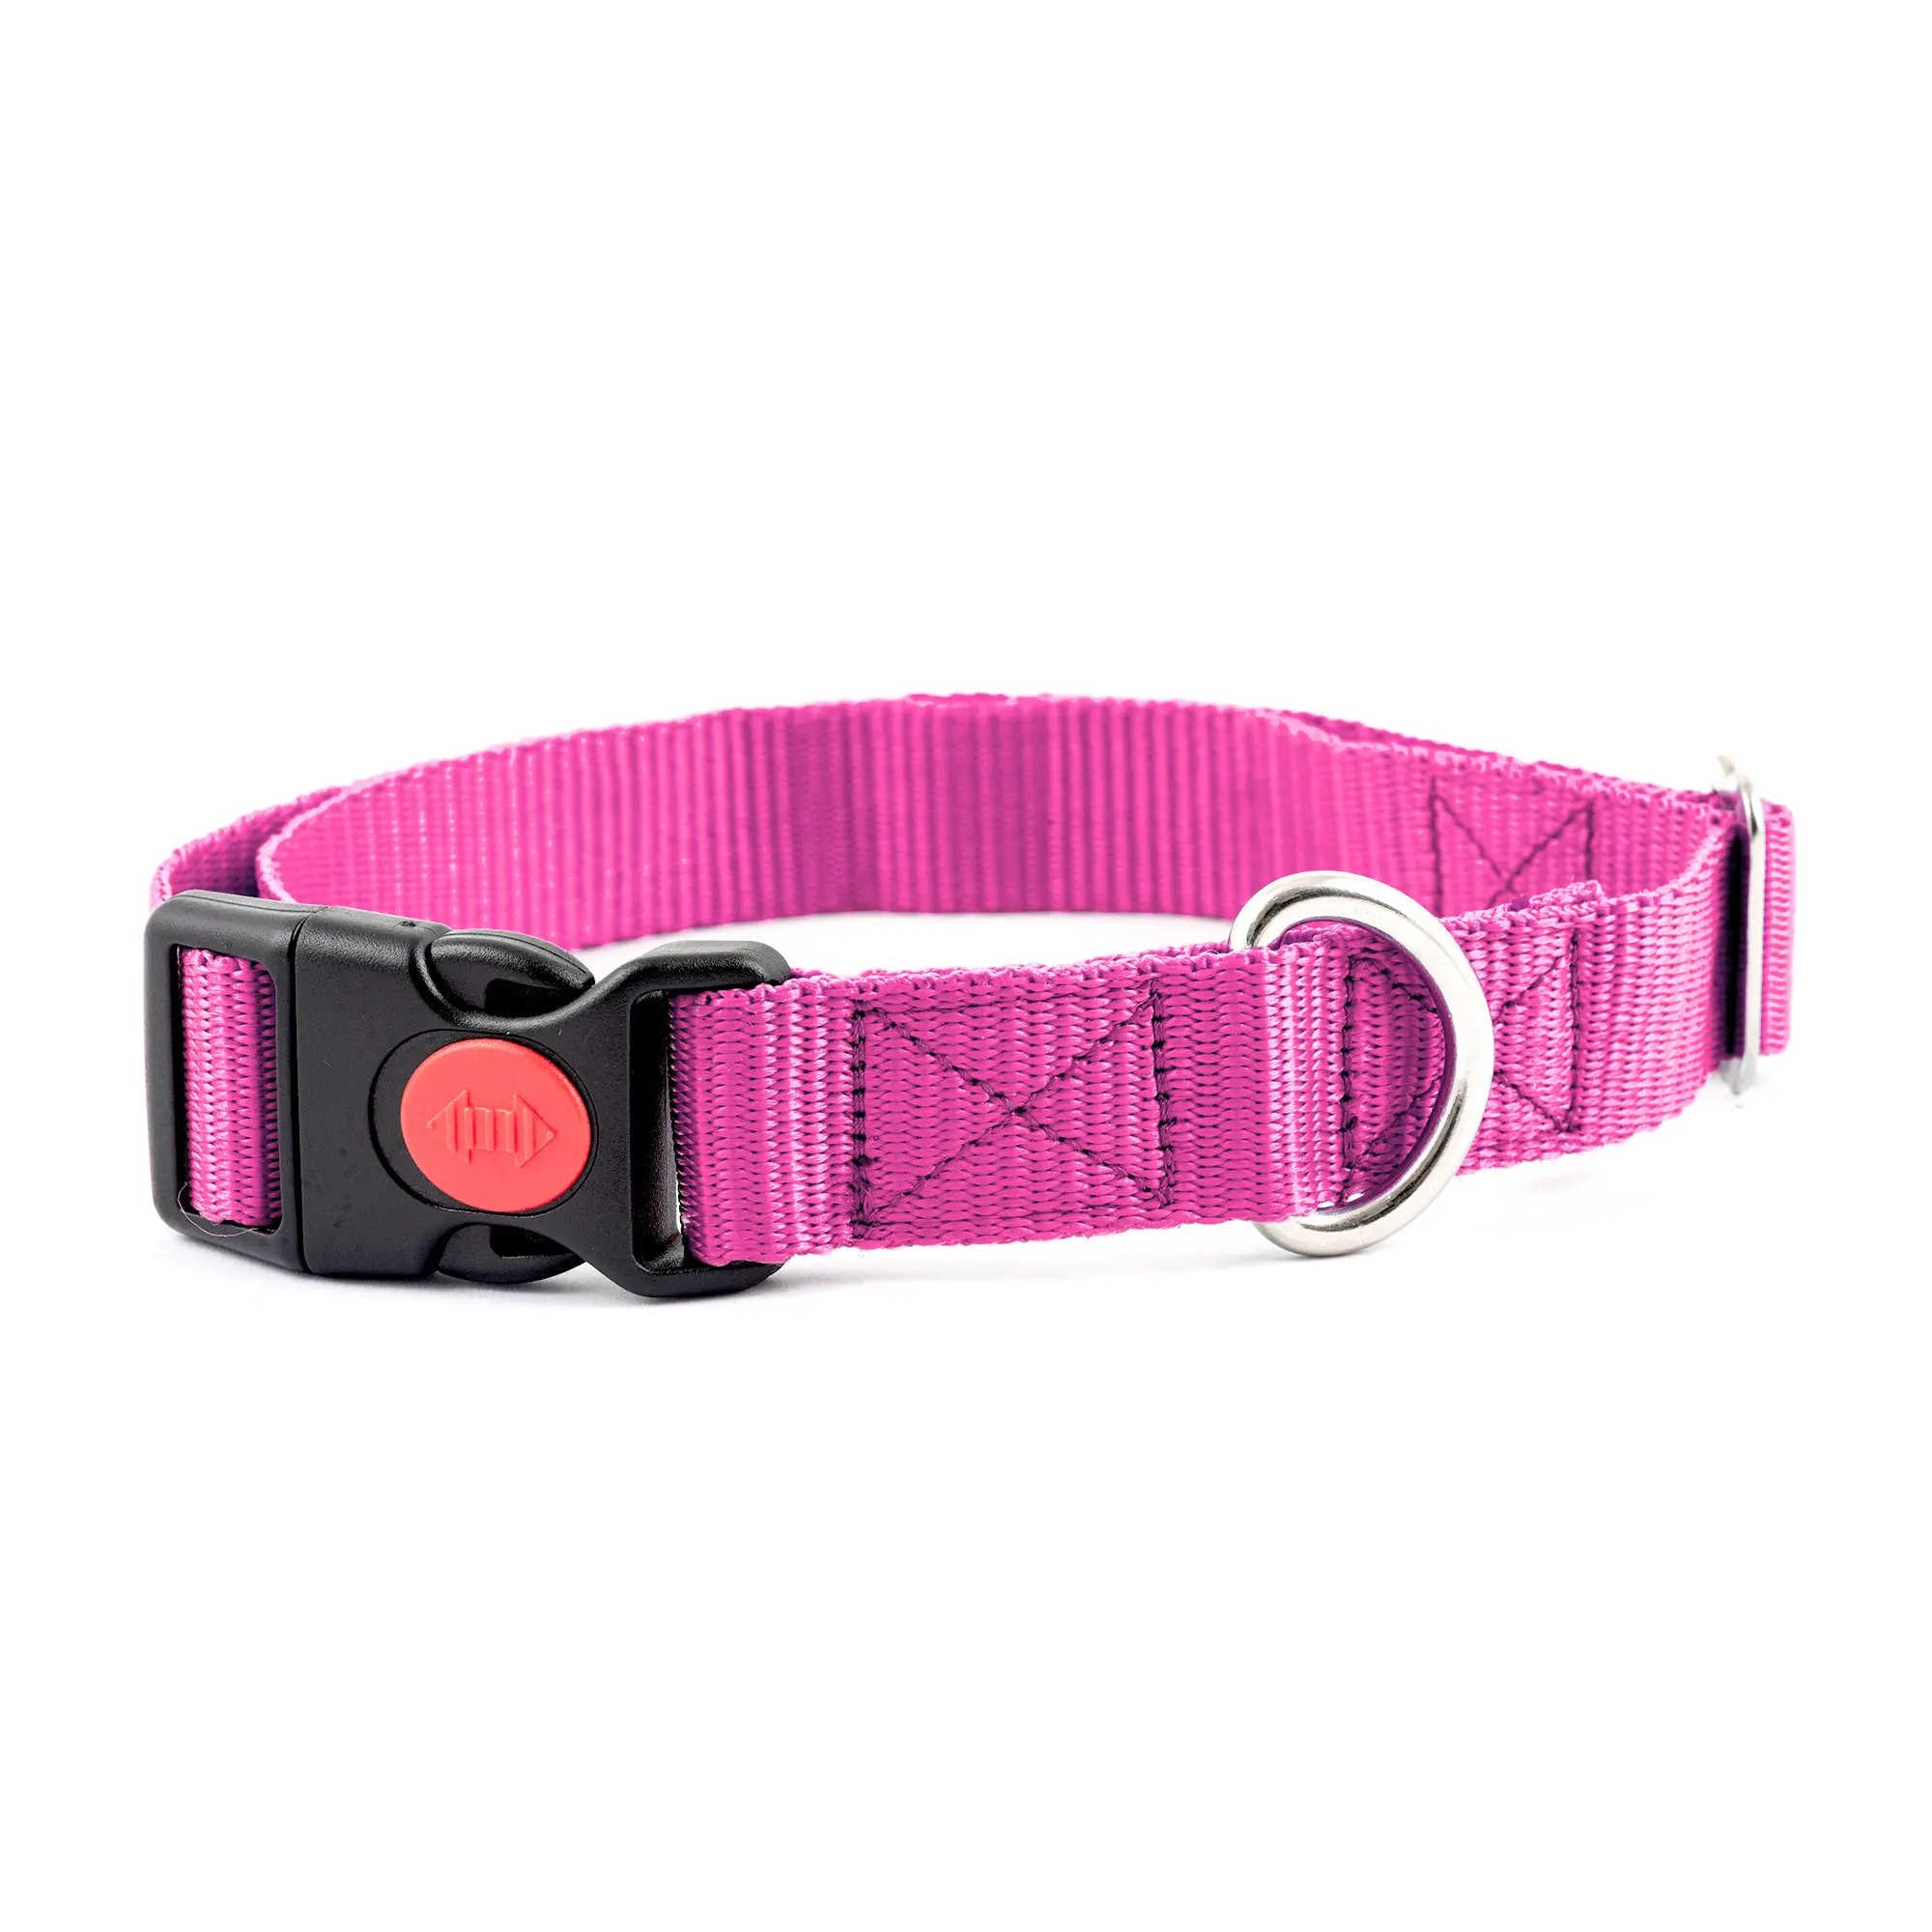 Personalized Dog Collars for All breed with Durable Plastic Lock Buckle and Soft Nylon Dog Collars with attracting colors, Pink